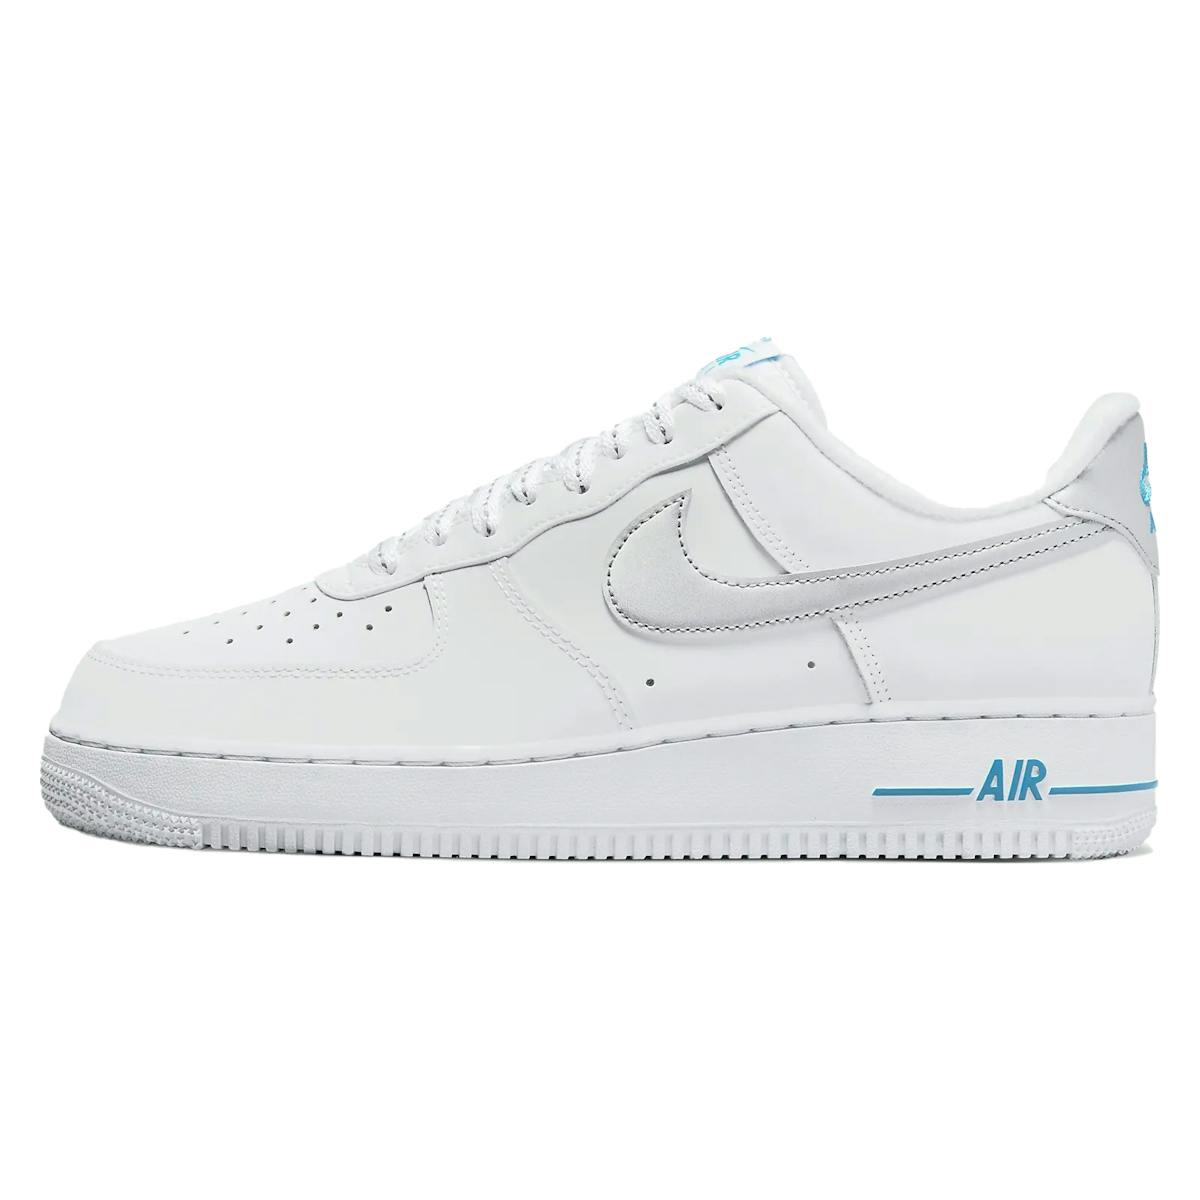 Nike Air Force 1 "Reflect Silver"